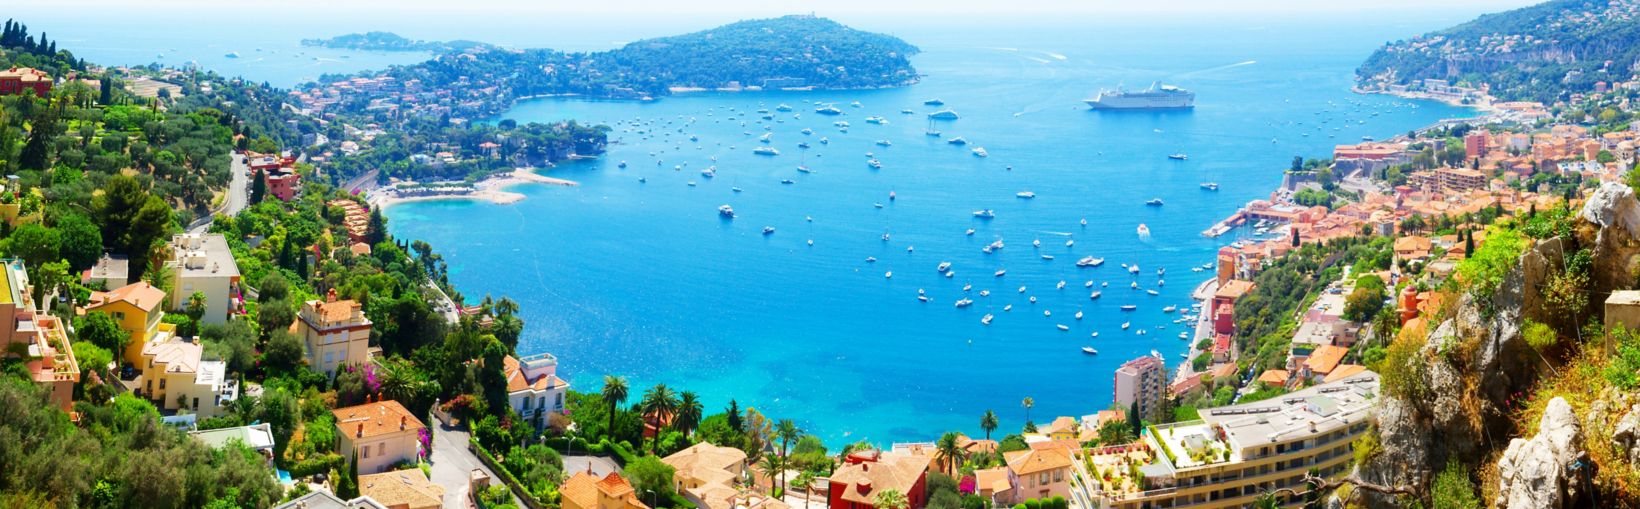 Panoramic view of the bay of Cote d'Azur, France